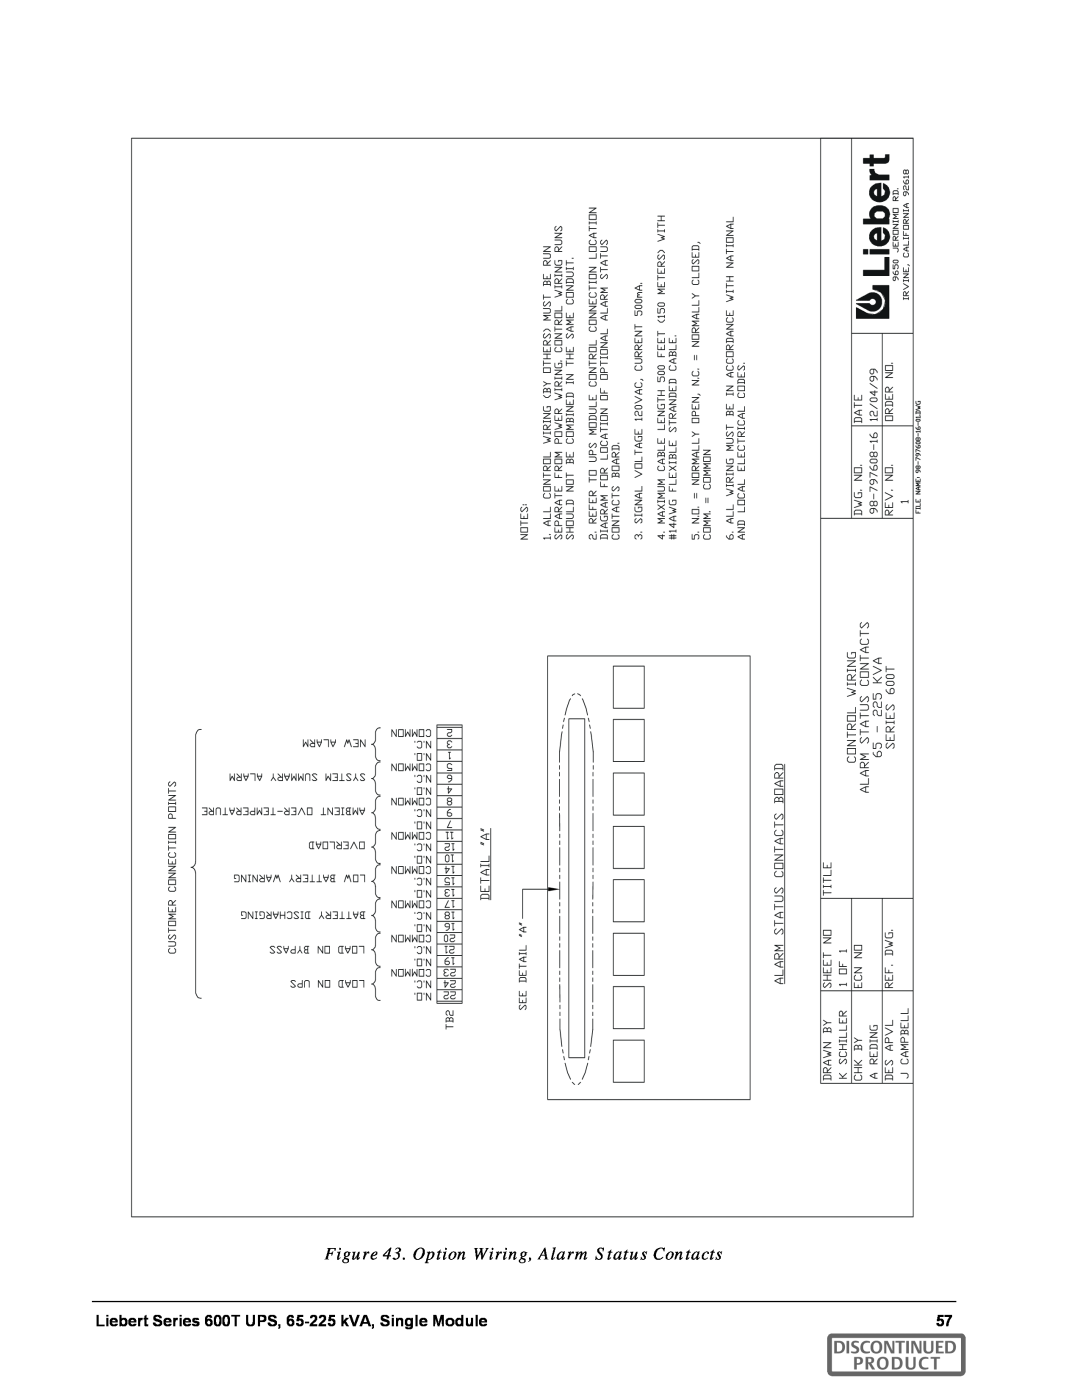 Emerson SERIES 600T manual Option Wiring, Alarm Status Contacts, Discontinued Product 